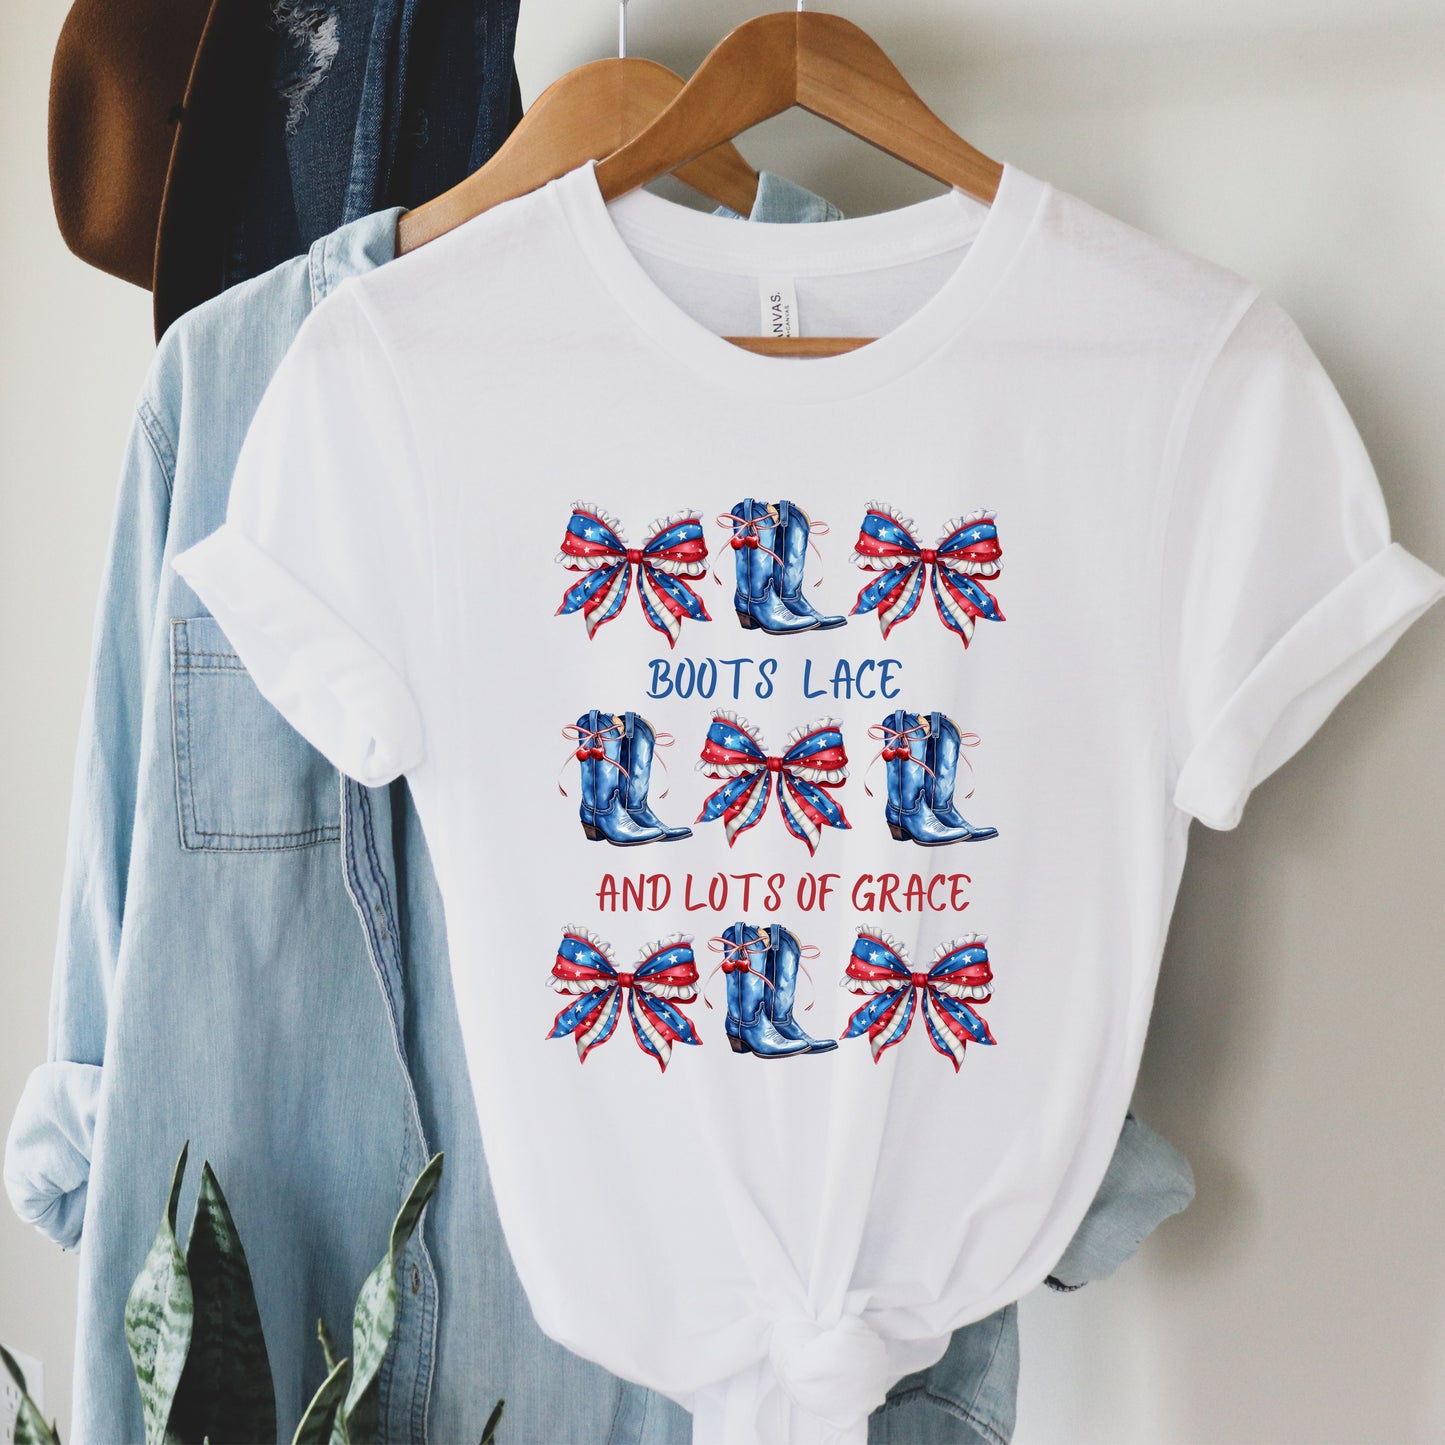 Boots Lace & Lots of Grade T-Shirt With Red White and Blue Bows and Boots